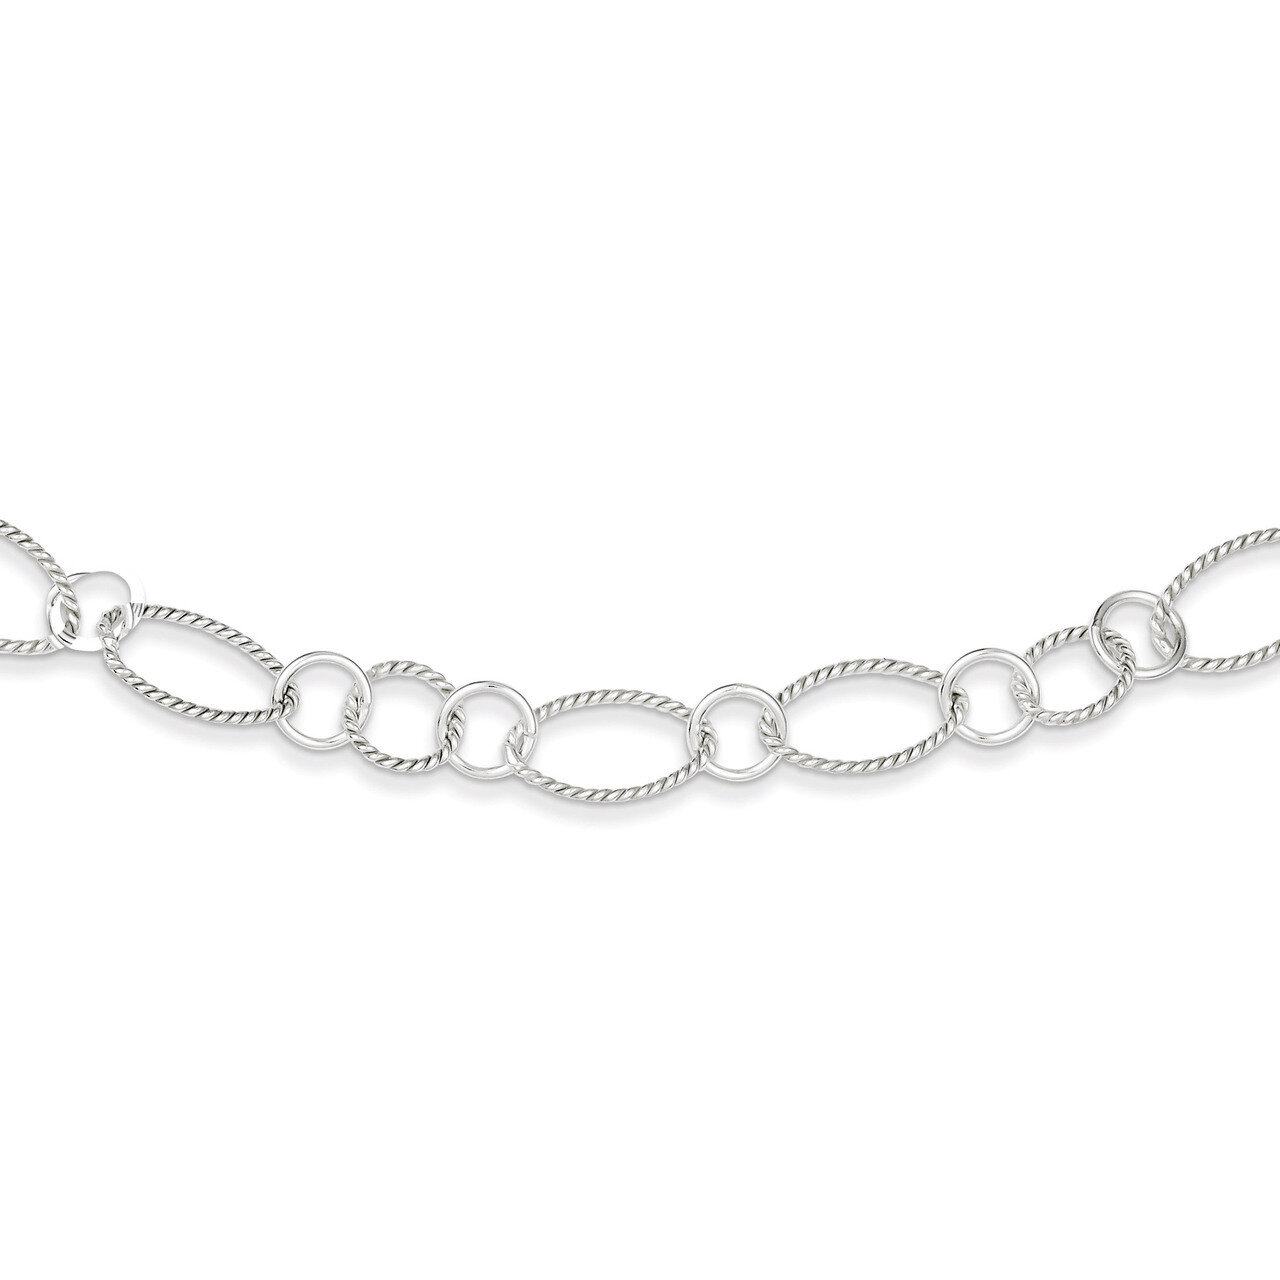 42 Inch Link Necklace Sterling Silver Fancy QH1138-42